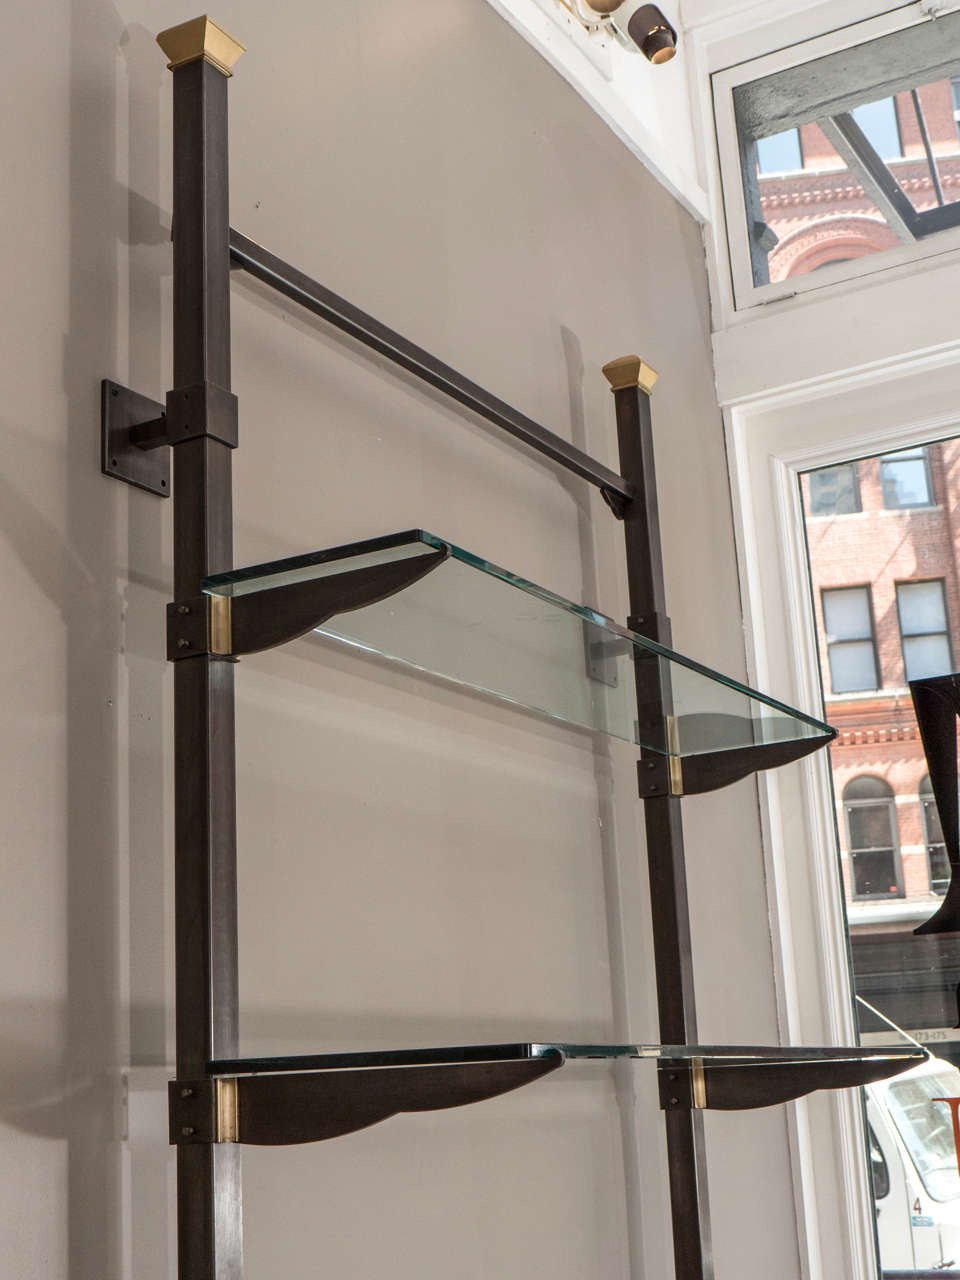 Viennese Secessionist Wall-Mounted Shelving System In Excellent Condition For Sale In Long Island City, NY